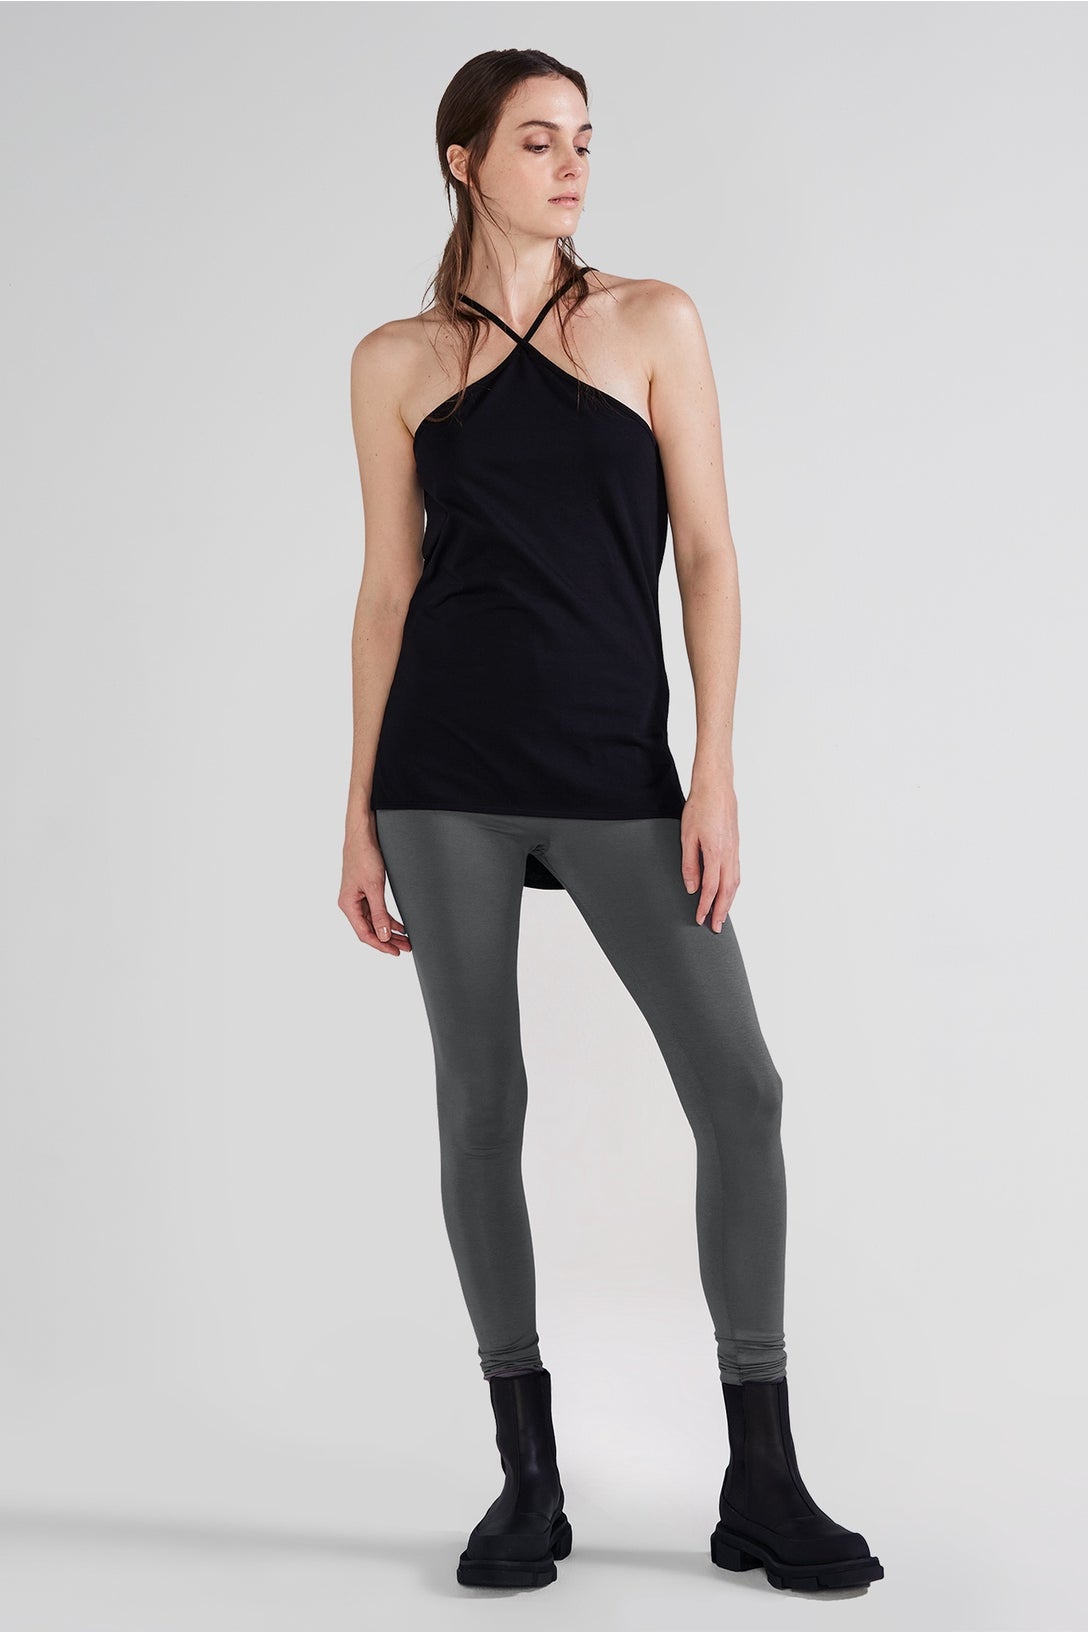 https://www.taylorboutique.co.nz/content/products/8175-Smoke-3-Raised-Intensify-Leggins-AW24_L11_0286-web.jpg?canvas=2:3&width=1088